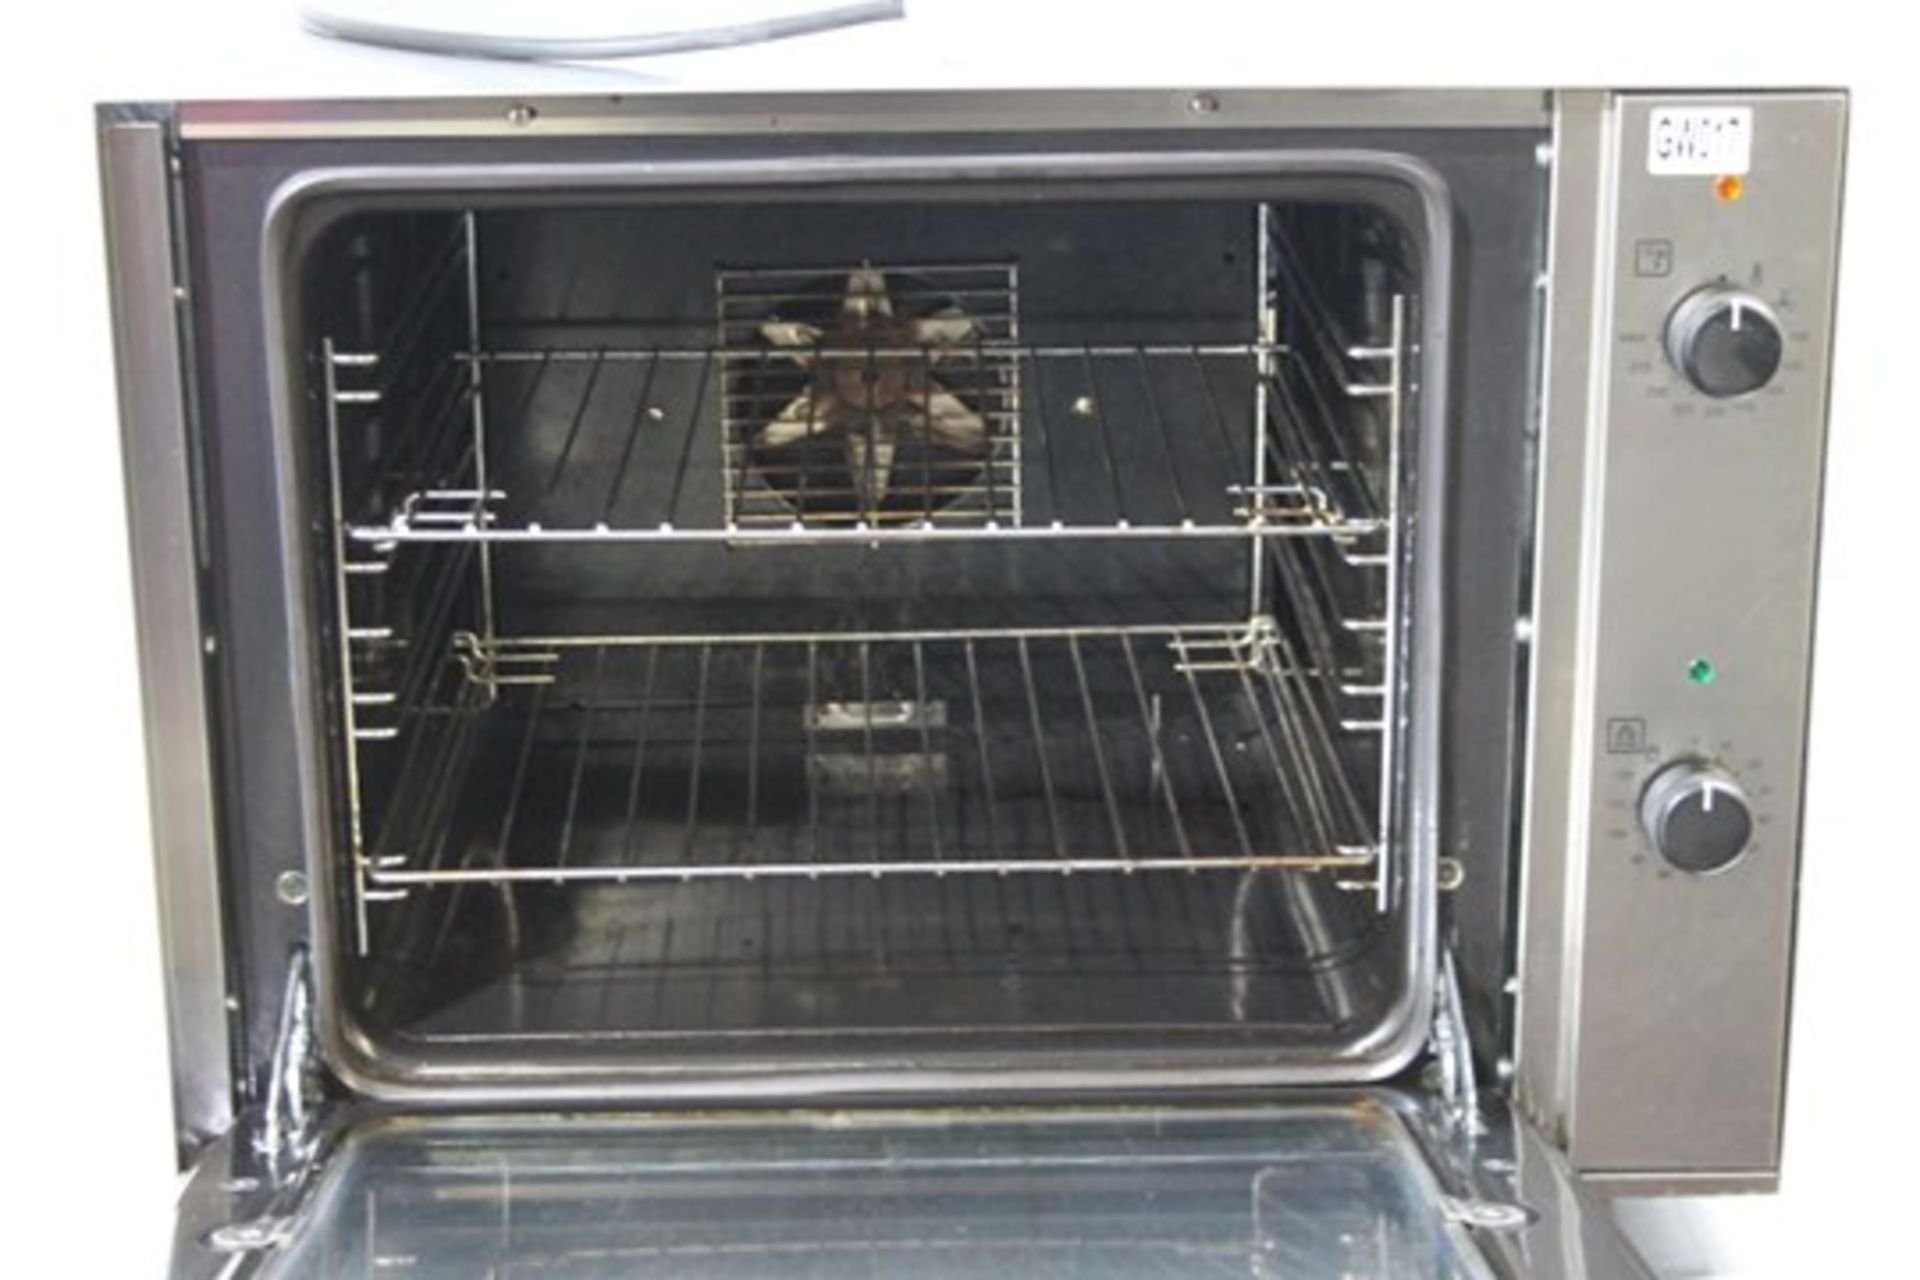 Chef Quip Table Top 5 Grid Convection Oven -1ph Electric - Model 740 – S/N 2509005146 As New – comes - Image 2 of 2